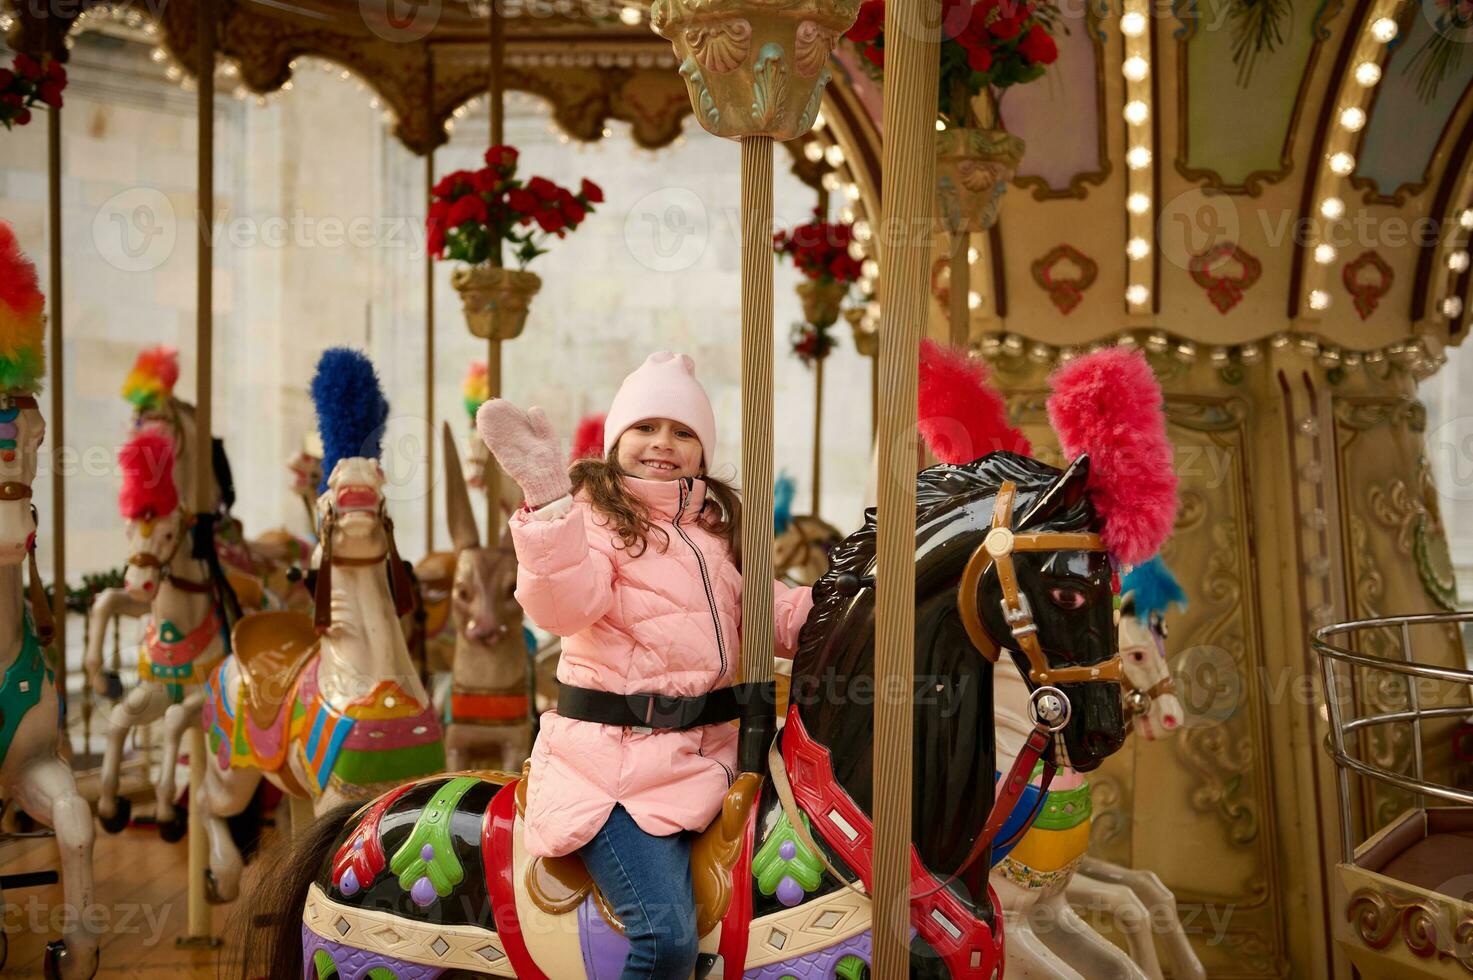 Adorable smiling kid girl waving hello while riding on merry go round carousel horse at Christmas winter market outdoor photo